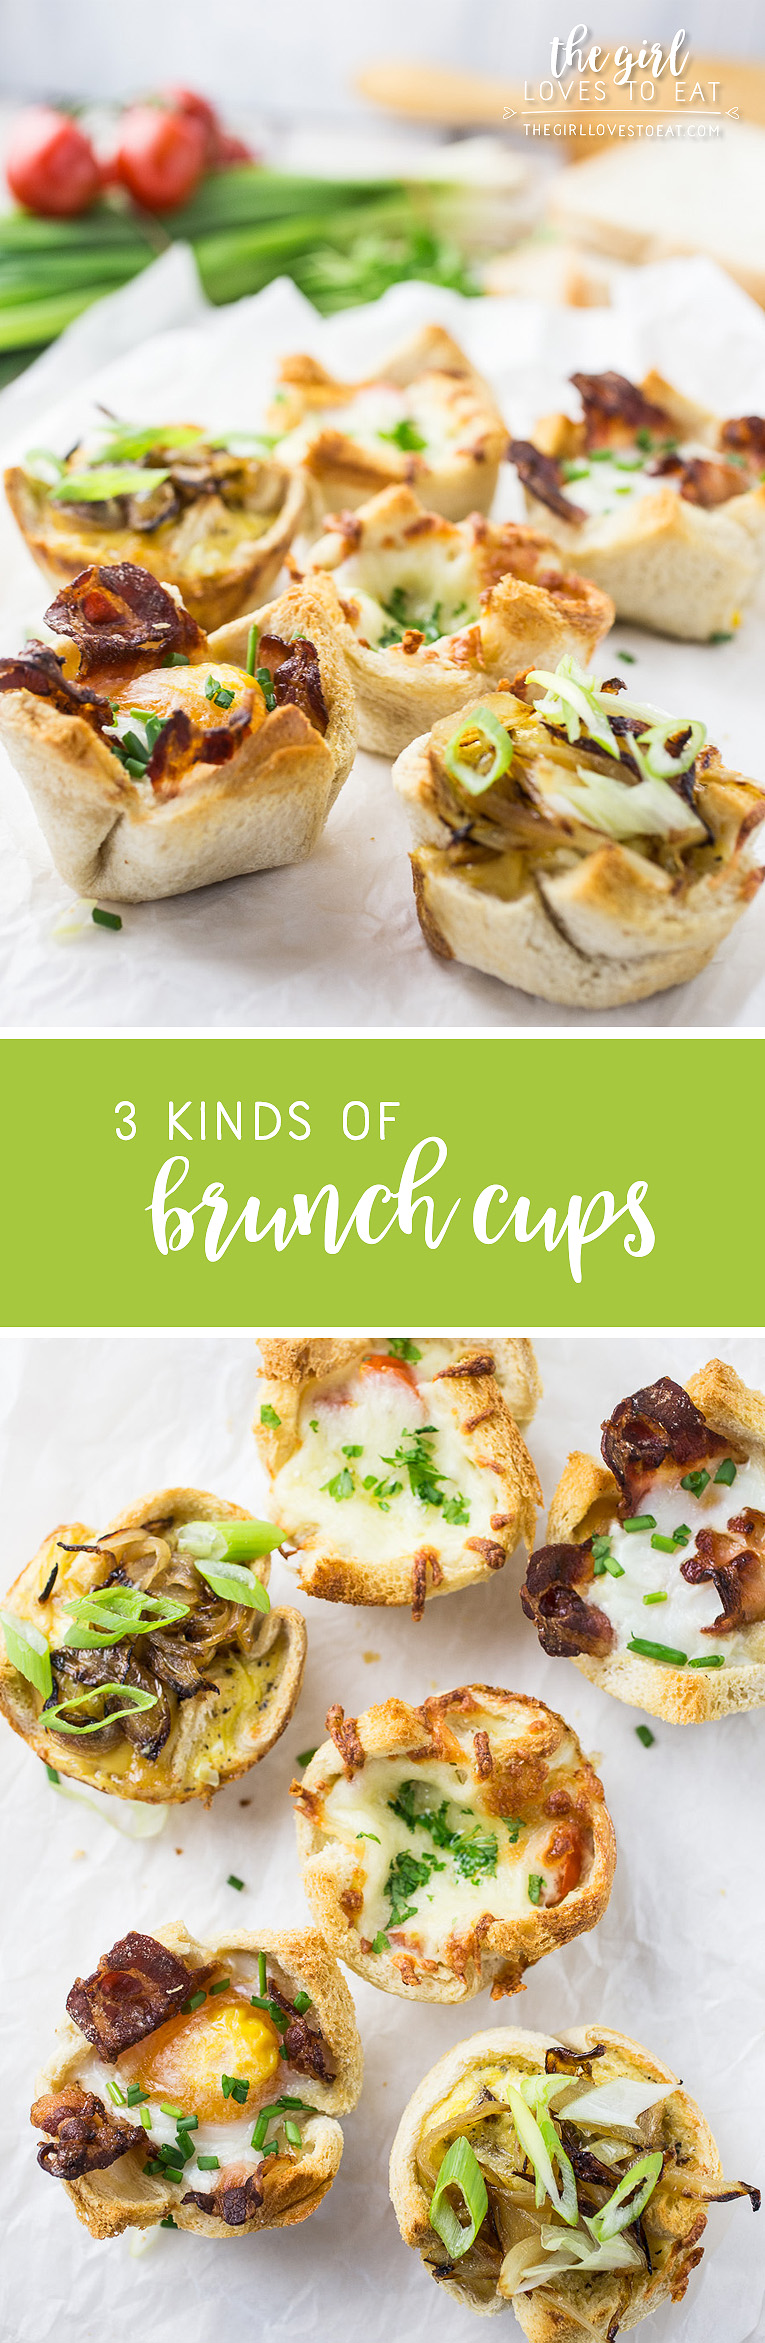 Brunch Cups - 3 different kinds | The Girl Loves To Eat